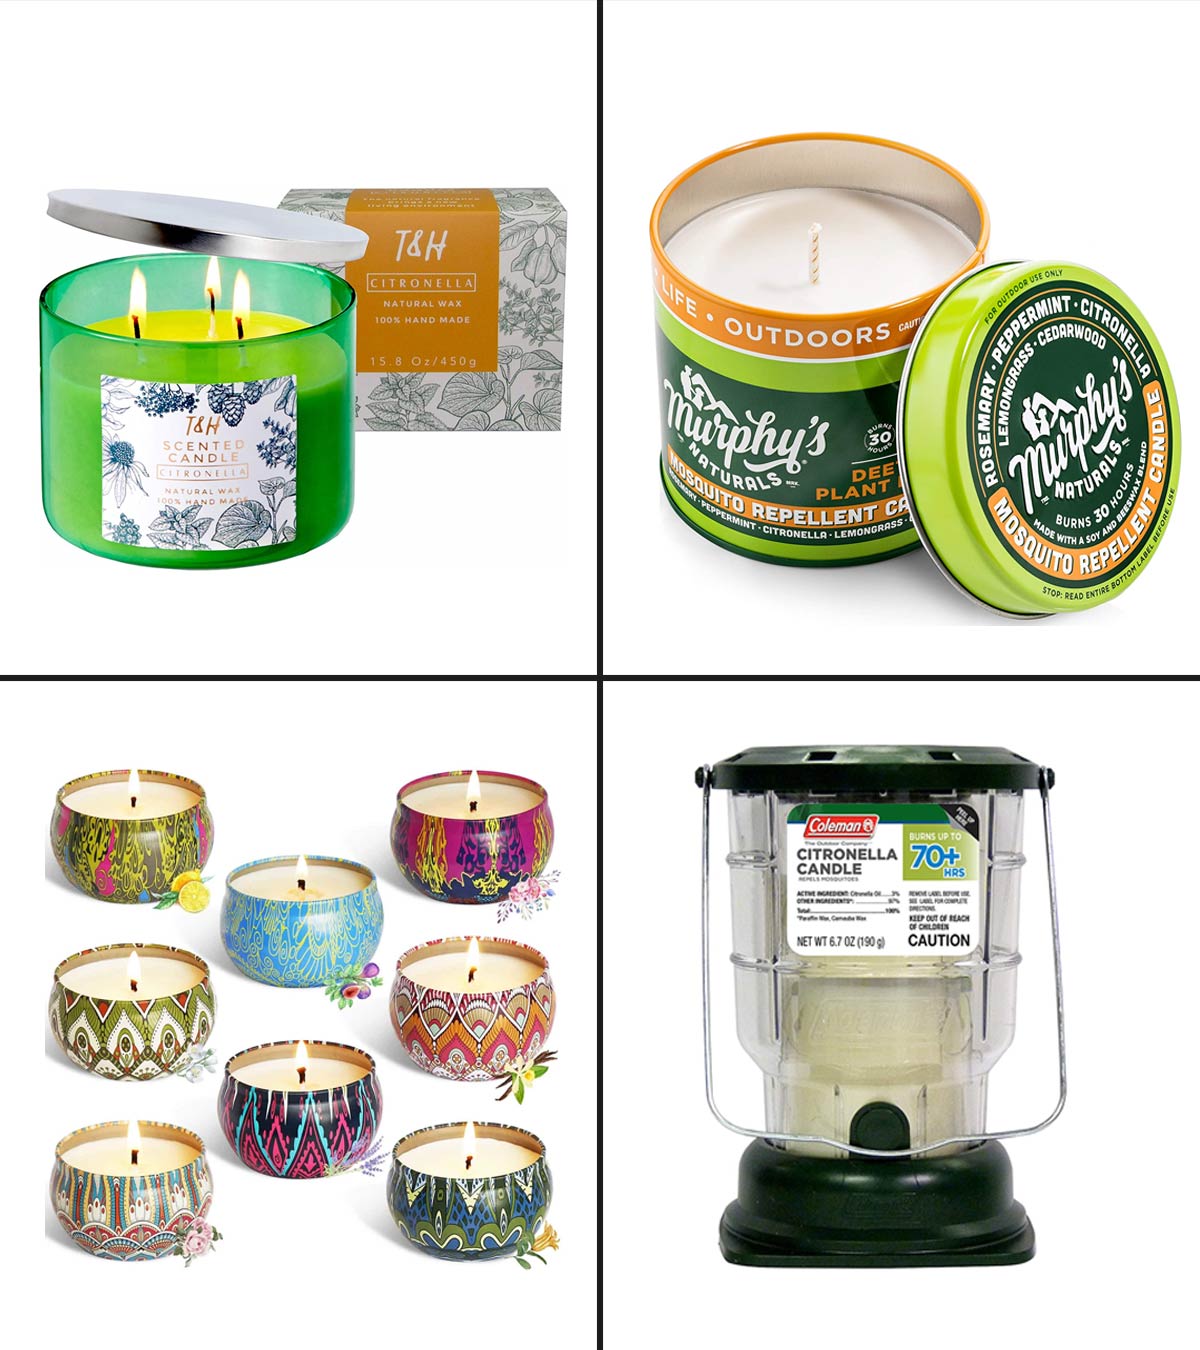 13 Best Citronella Candles For Keeping Pests Away in 2023